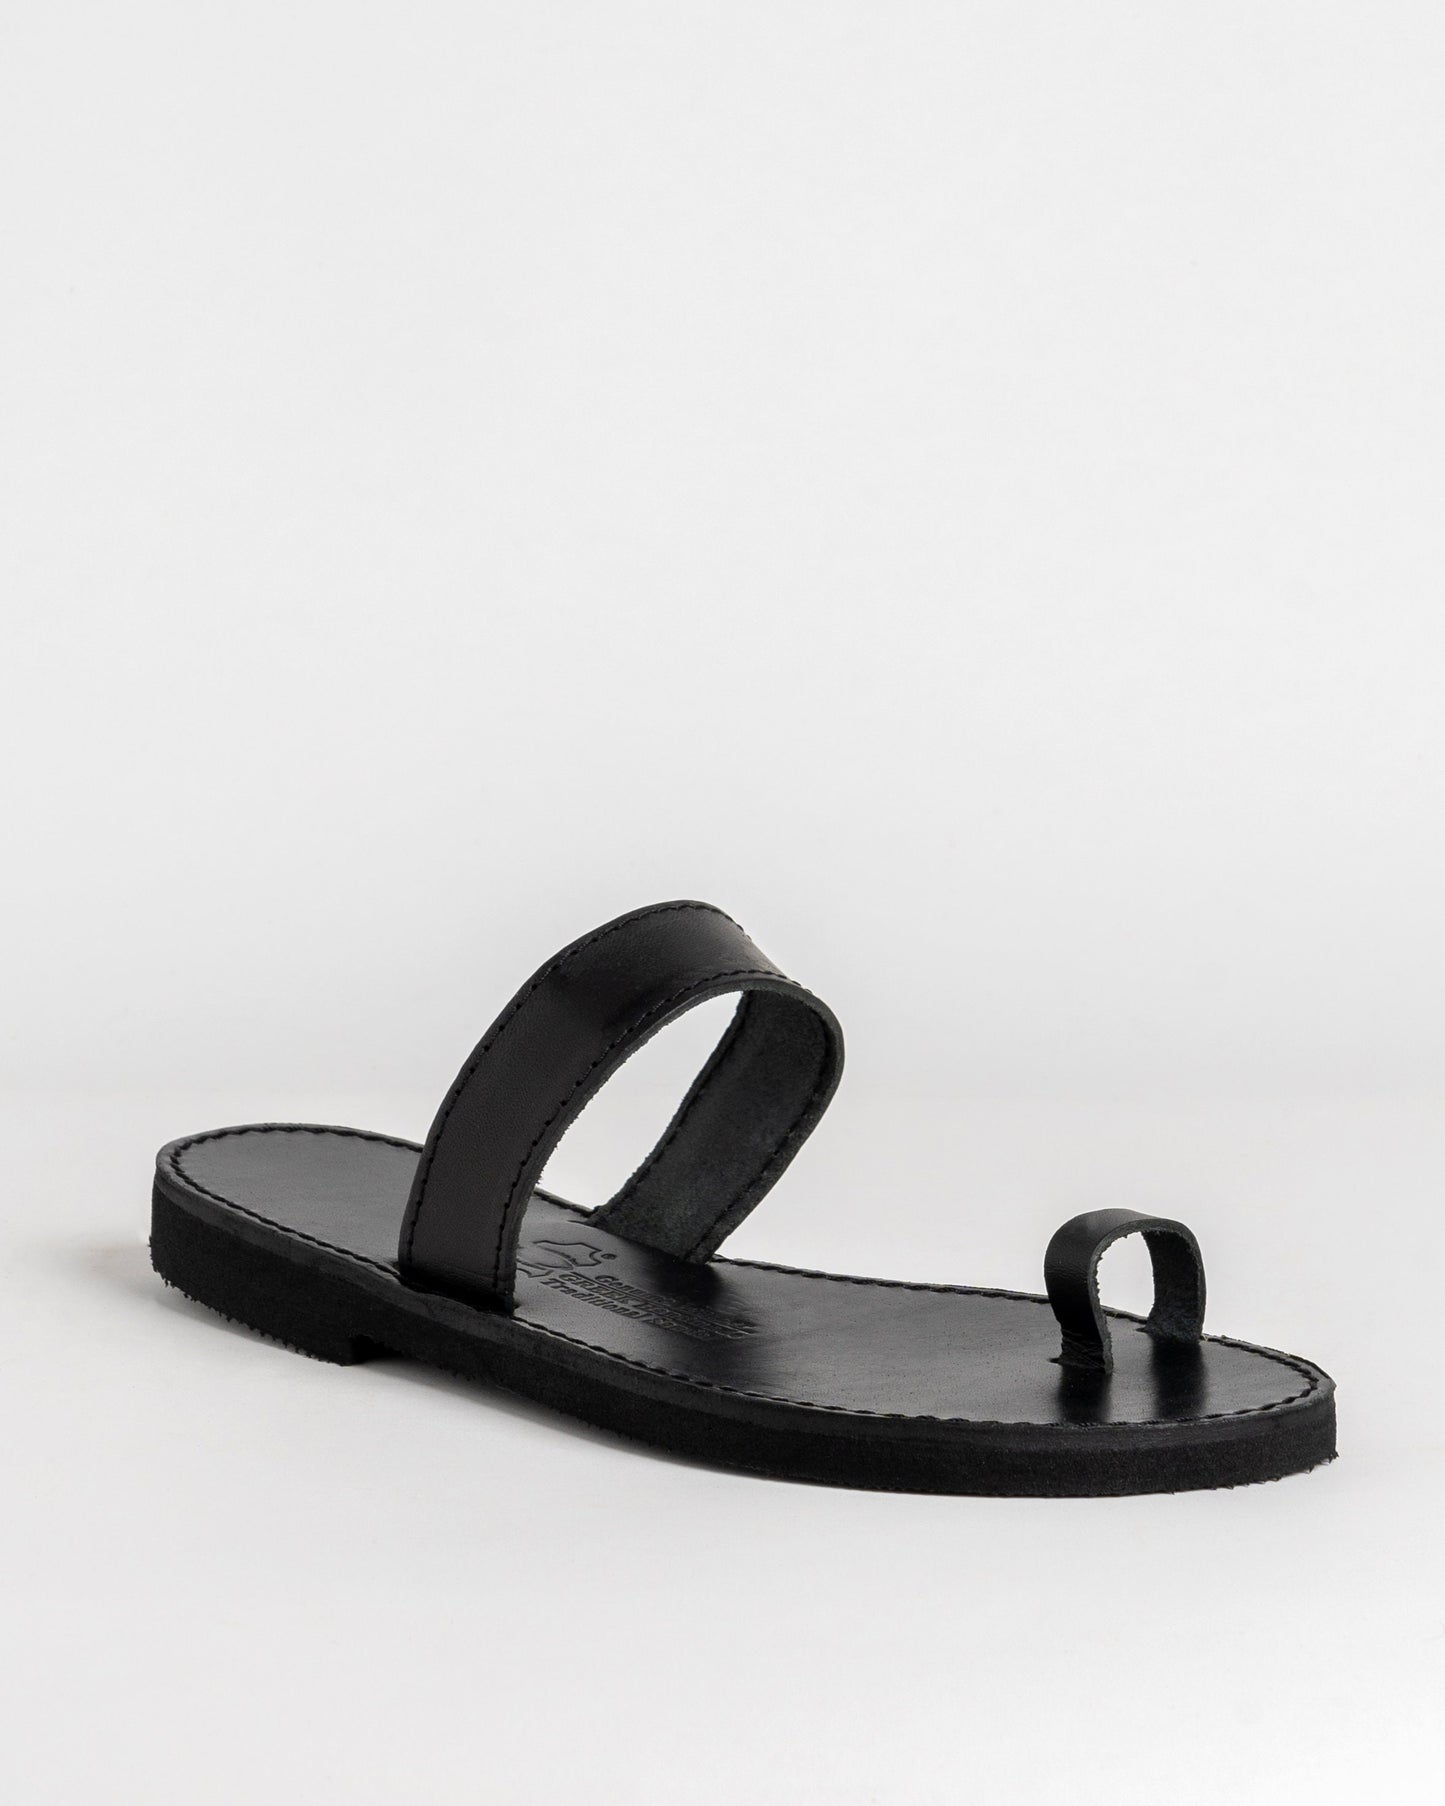 Leather women sandals, Toe ring leather sandals, Natural leather barefoot sandals, Classic Greek style sandals